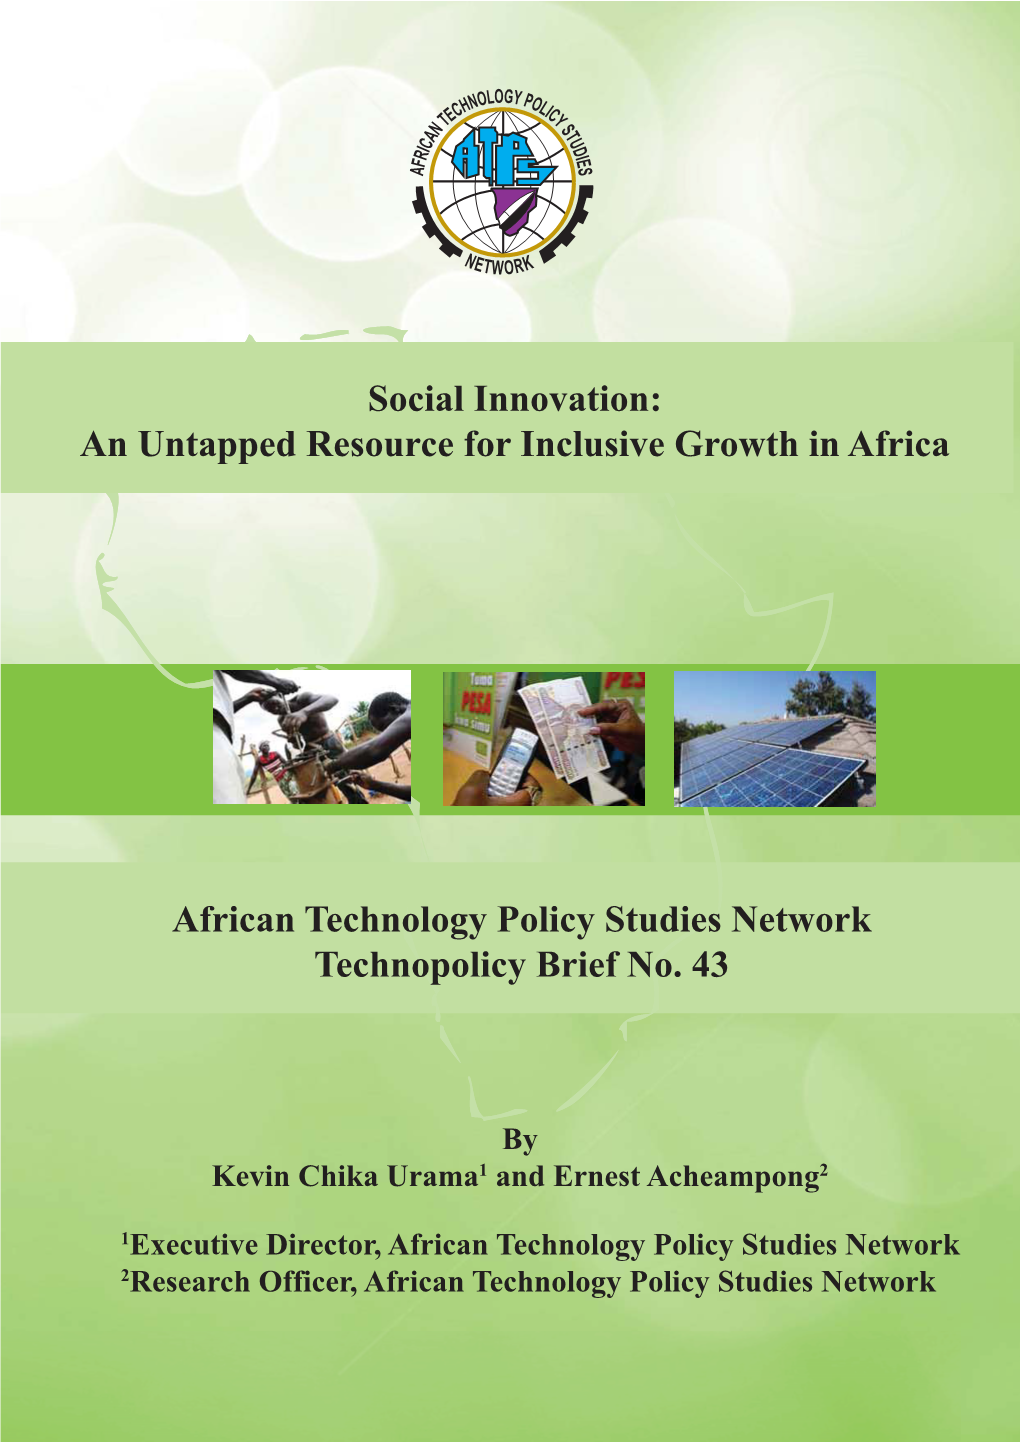 Social Innovation: an Untapped Resource for Inclusive Growth in Africa